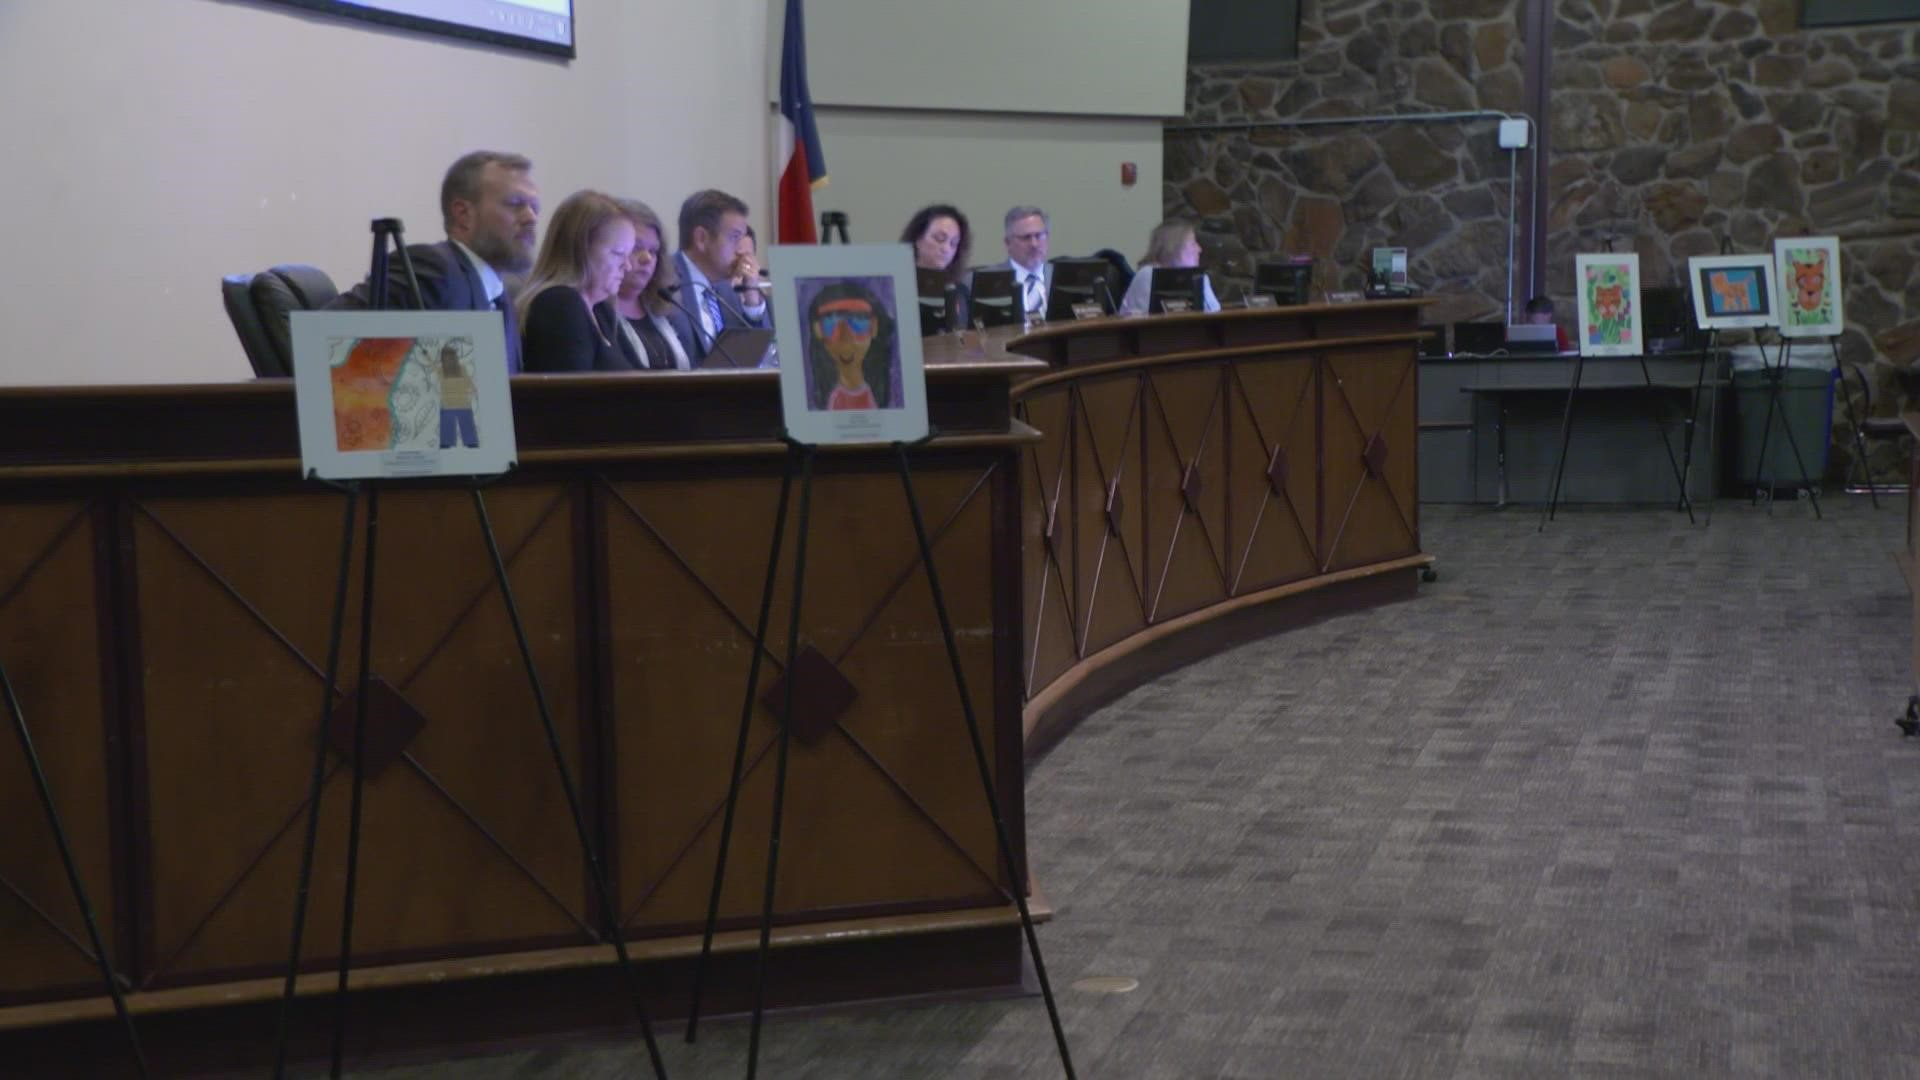 More than 70 people spoke for nearly three hours in Keller ISD’s board meeting Monday to debate what books belong in schools.